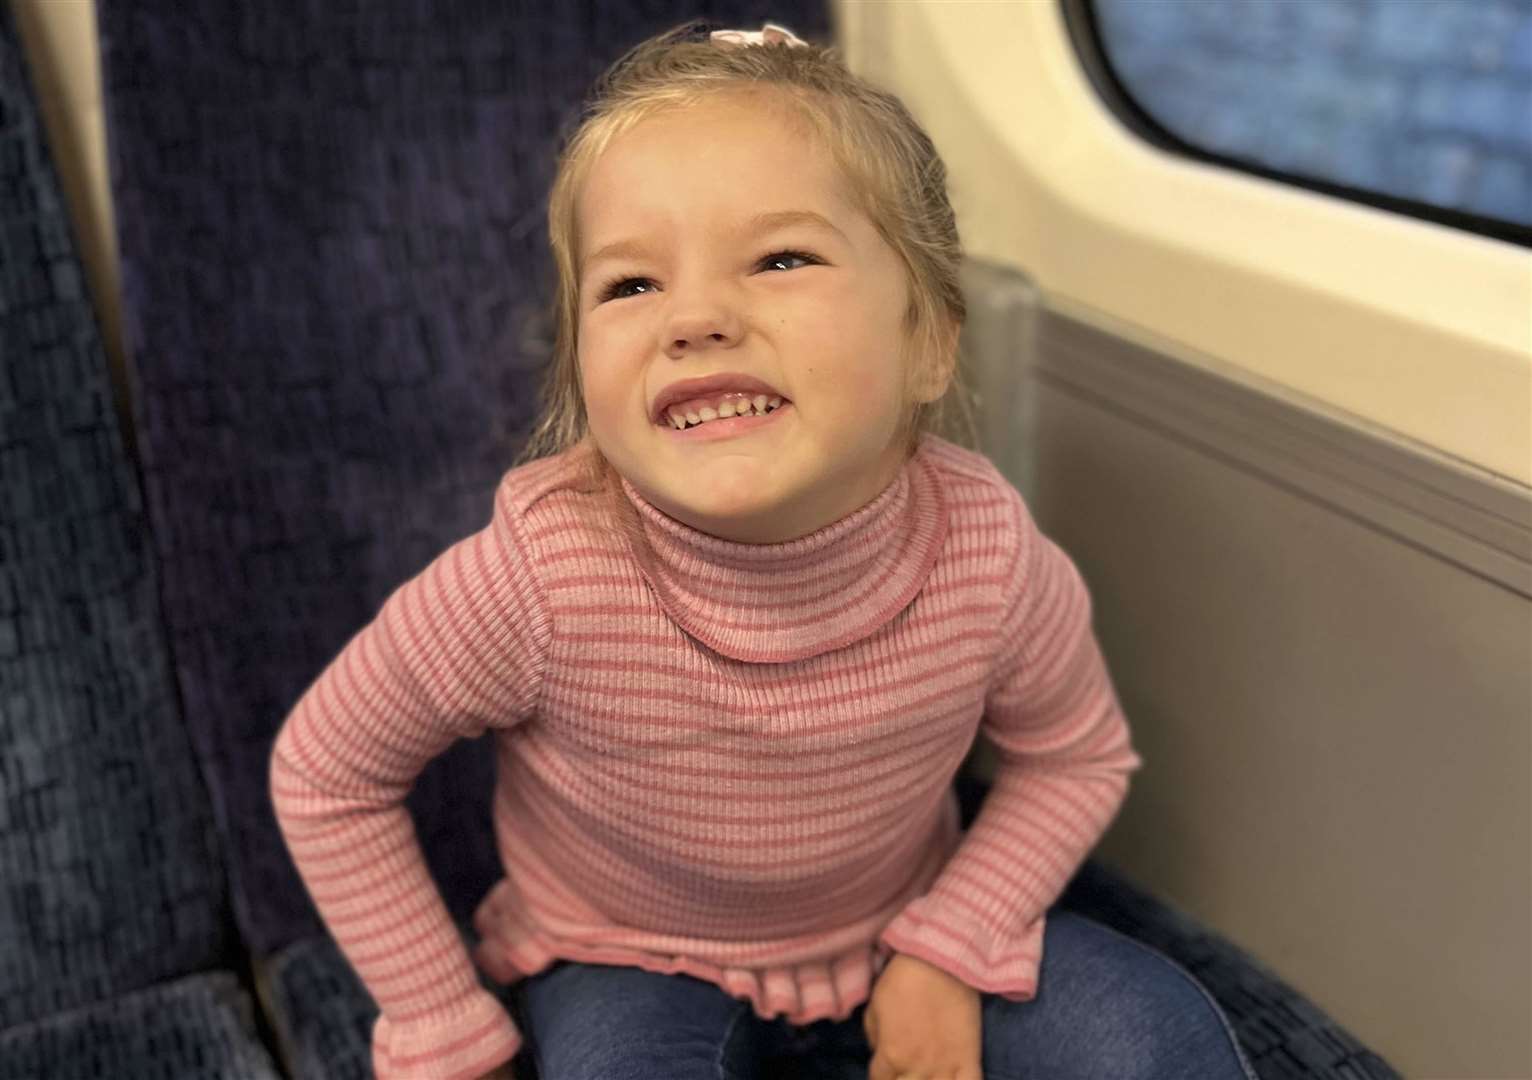 Hallie has been attending the Evelina children's hospital in London